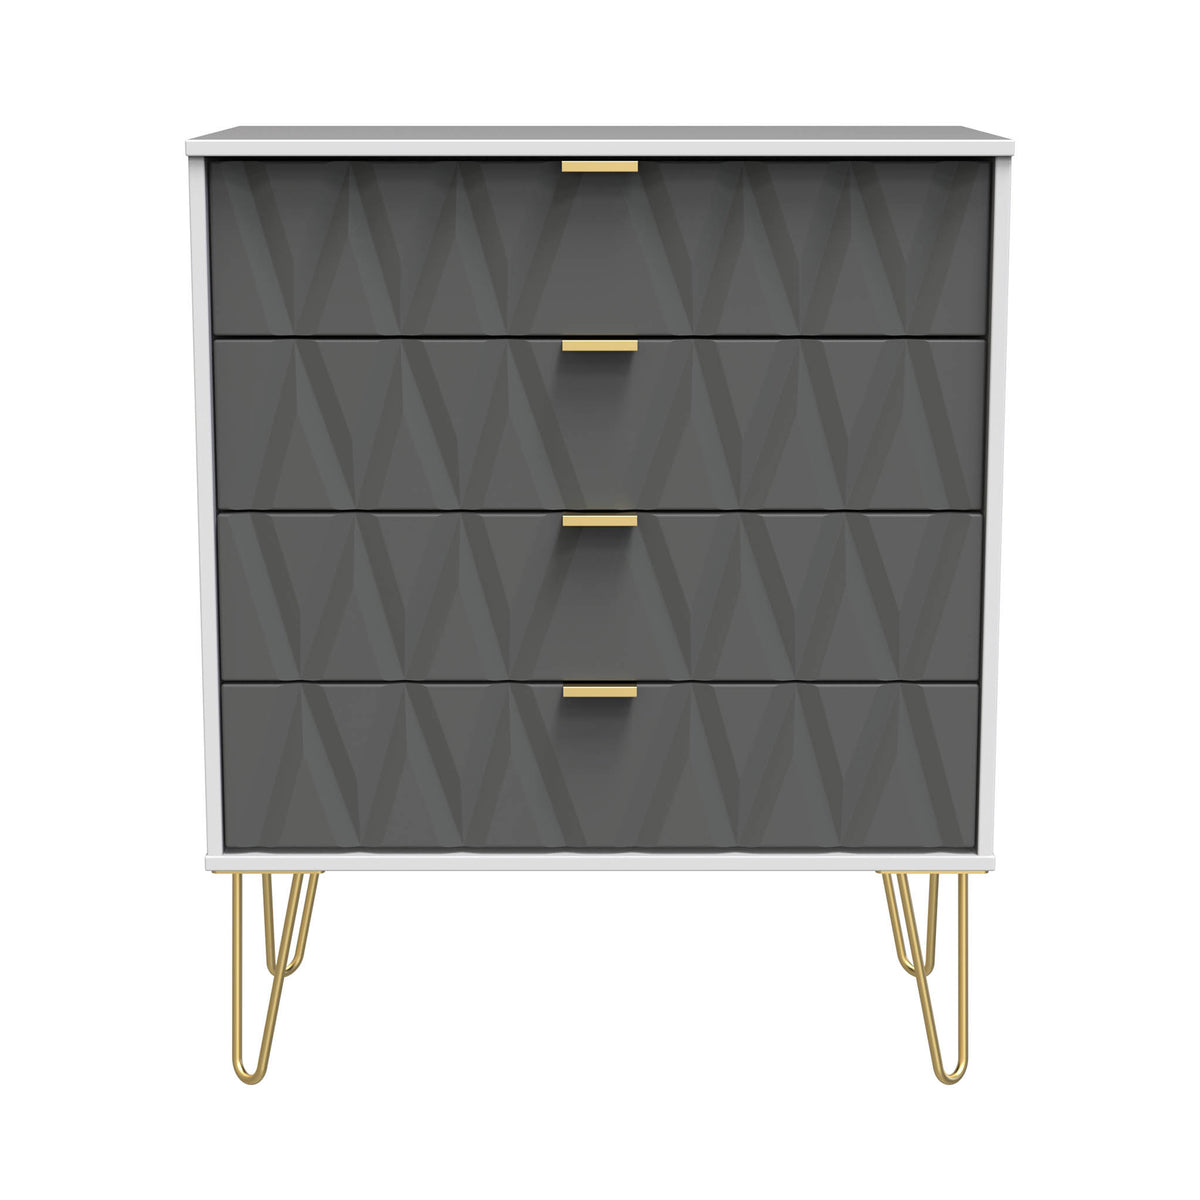 Geo white and grey 4 drawer chest with gold hair pins legs from roseland